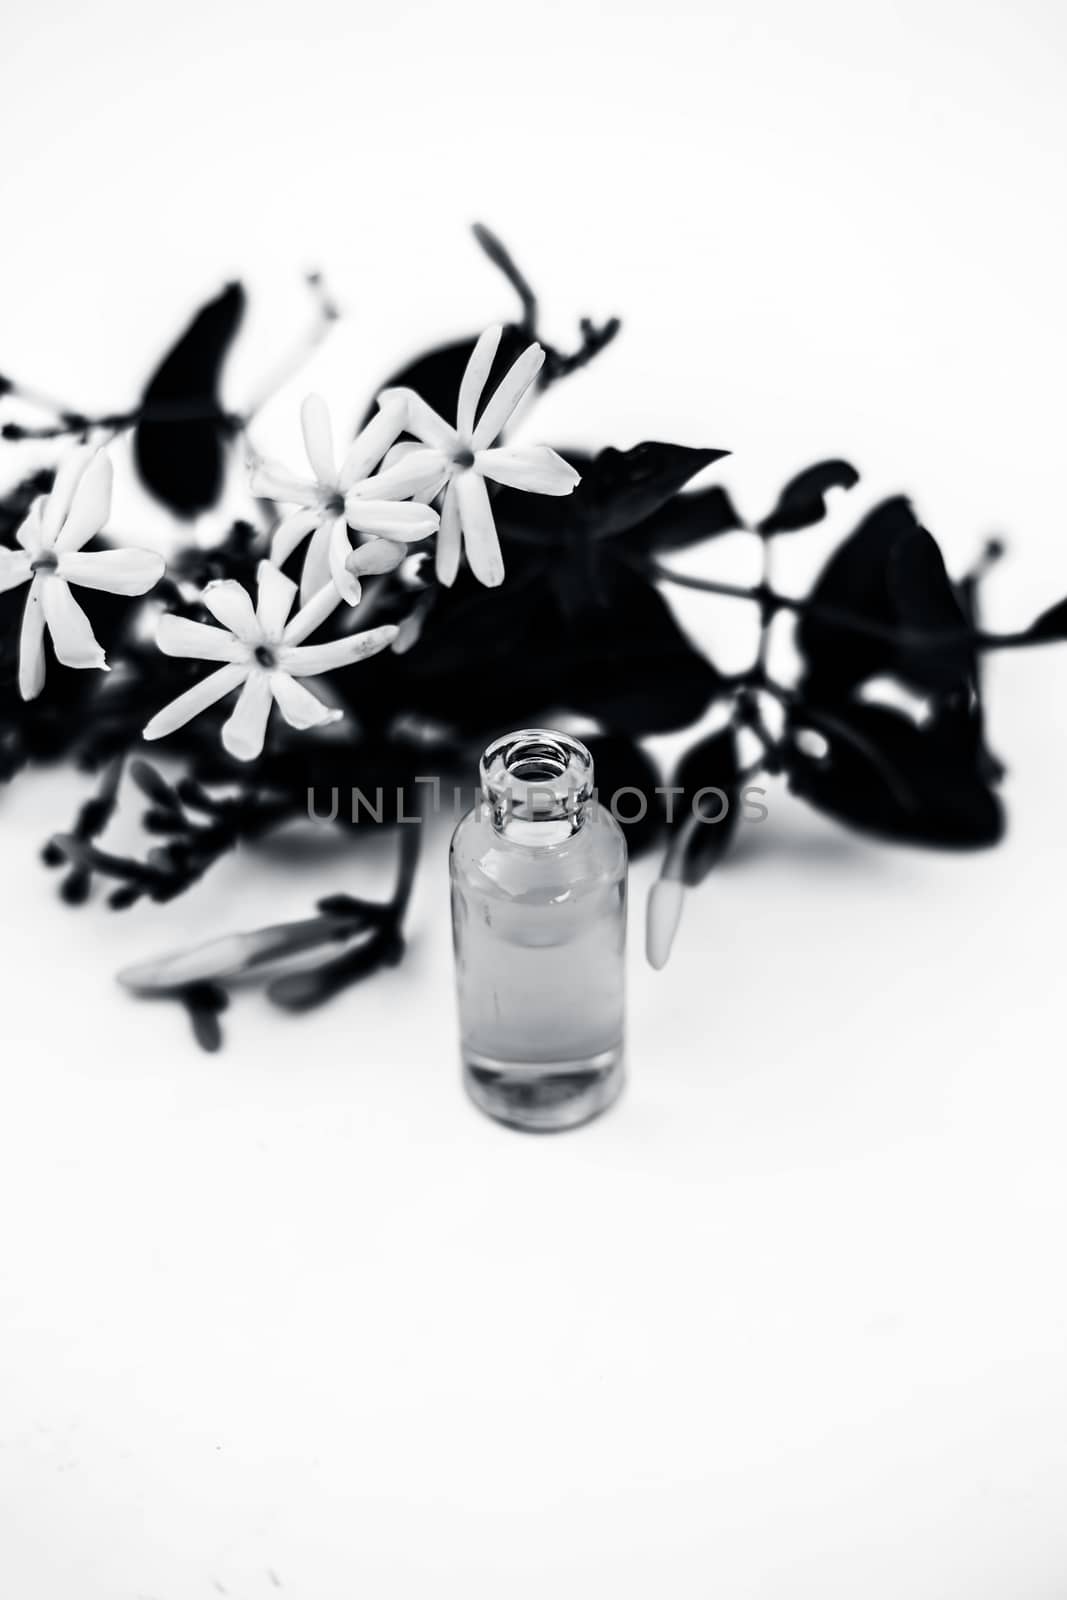 Close up of essence or essential oil of Indian jasmine flower or juhi or Jasminum Auriculatum isolated on white in a small transparent glass bottle with raw flowers. by mirzamlk